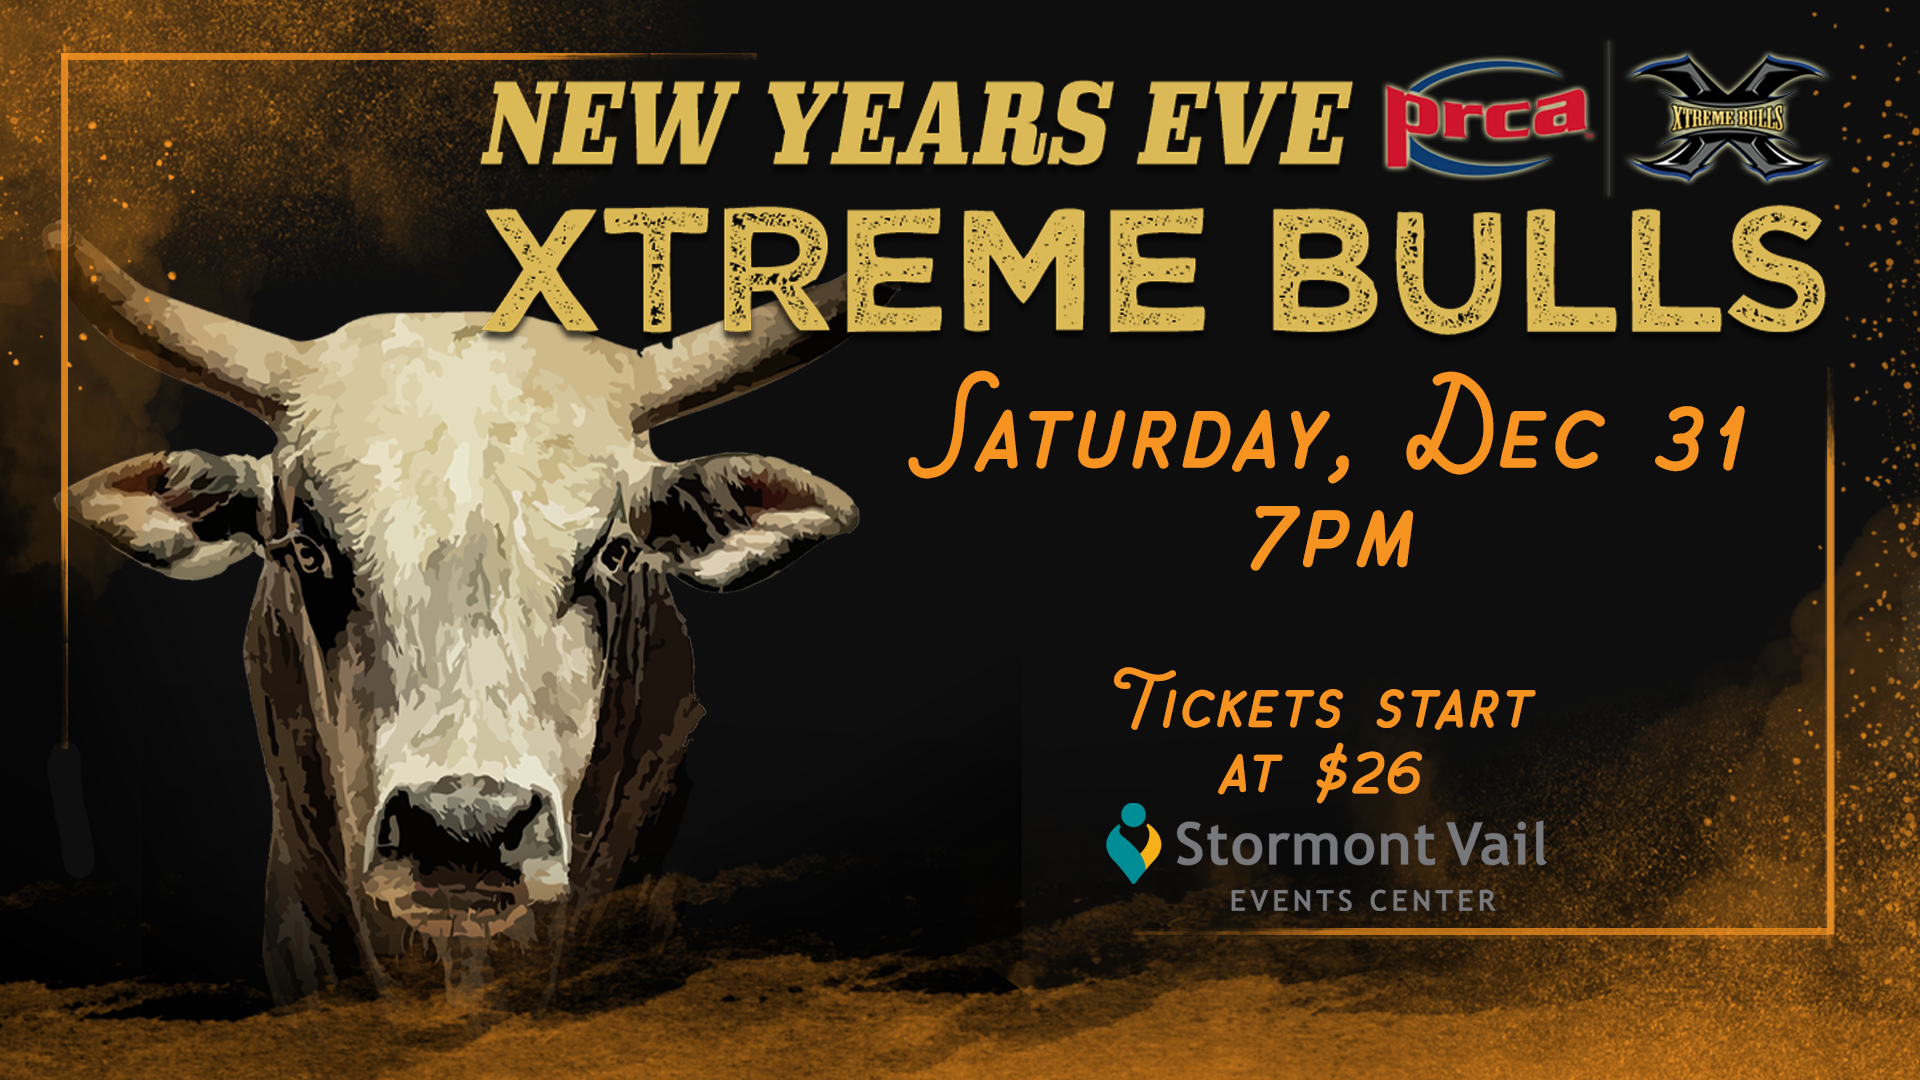 <h1 class="tribe-events-single-event-title">New Year’s Eve Xtreme Bulls at Stormont Vail Events Center on Saturday, December 31st</h1>